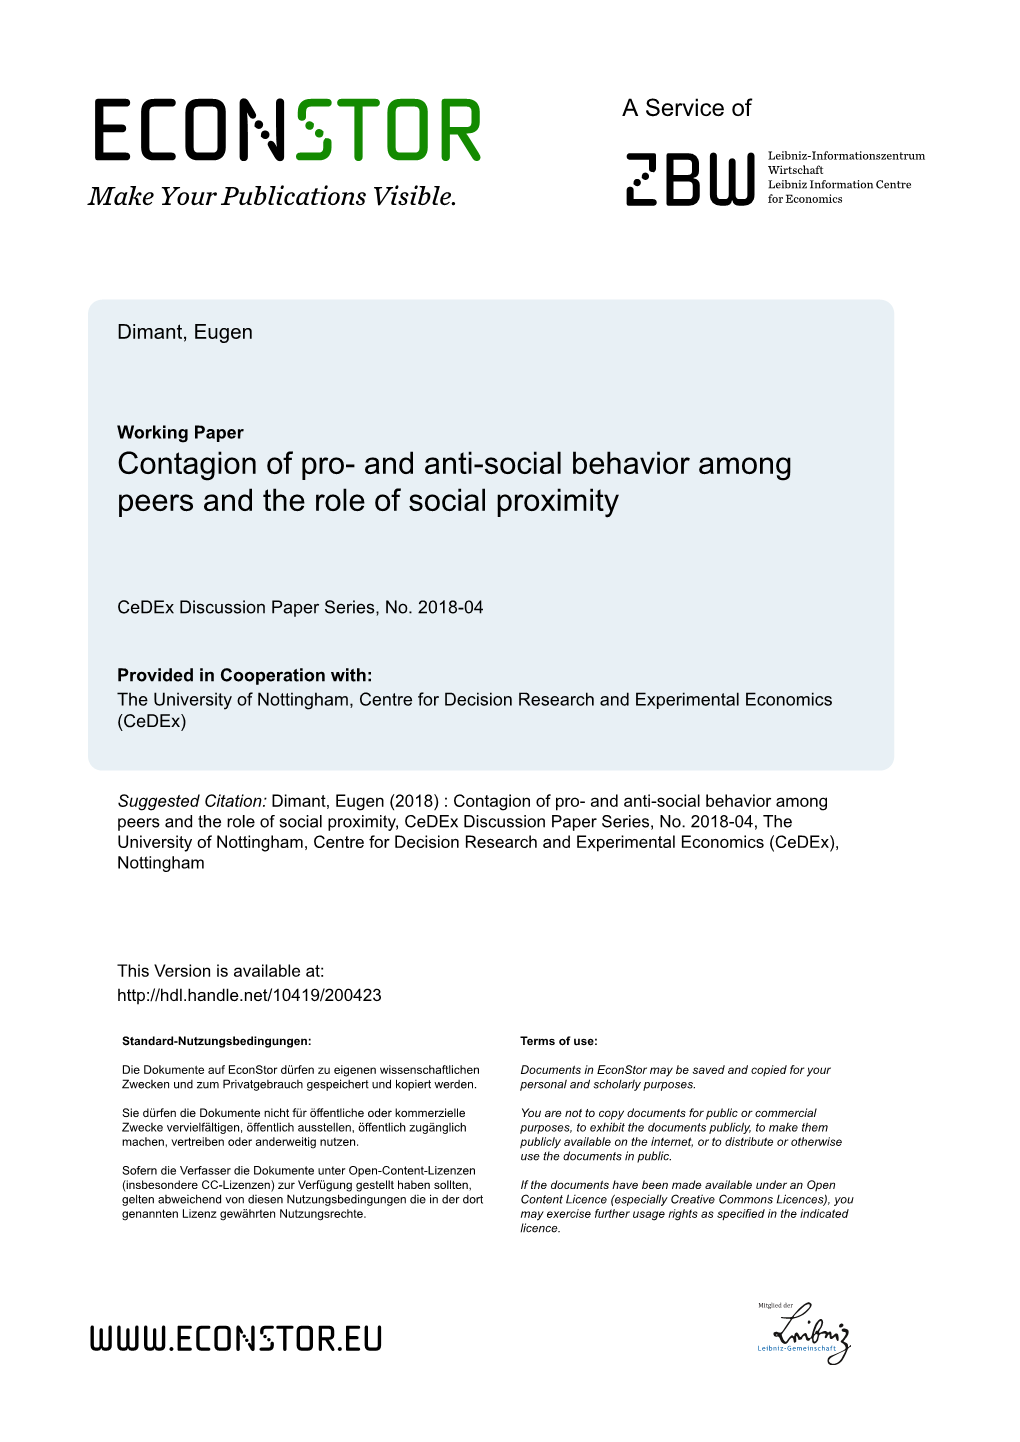 Contagion of Pro- and Anti-Social Behavior Among Peers and the Role of Social Proximity